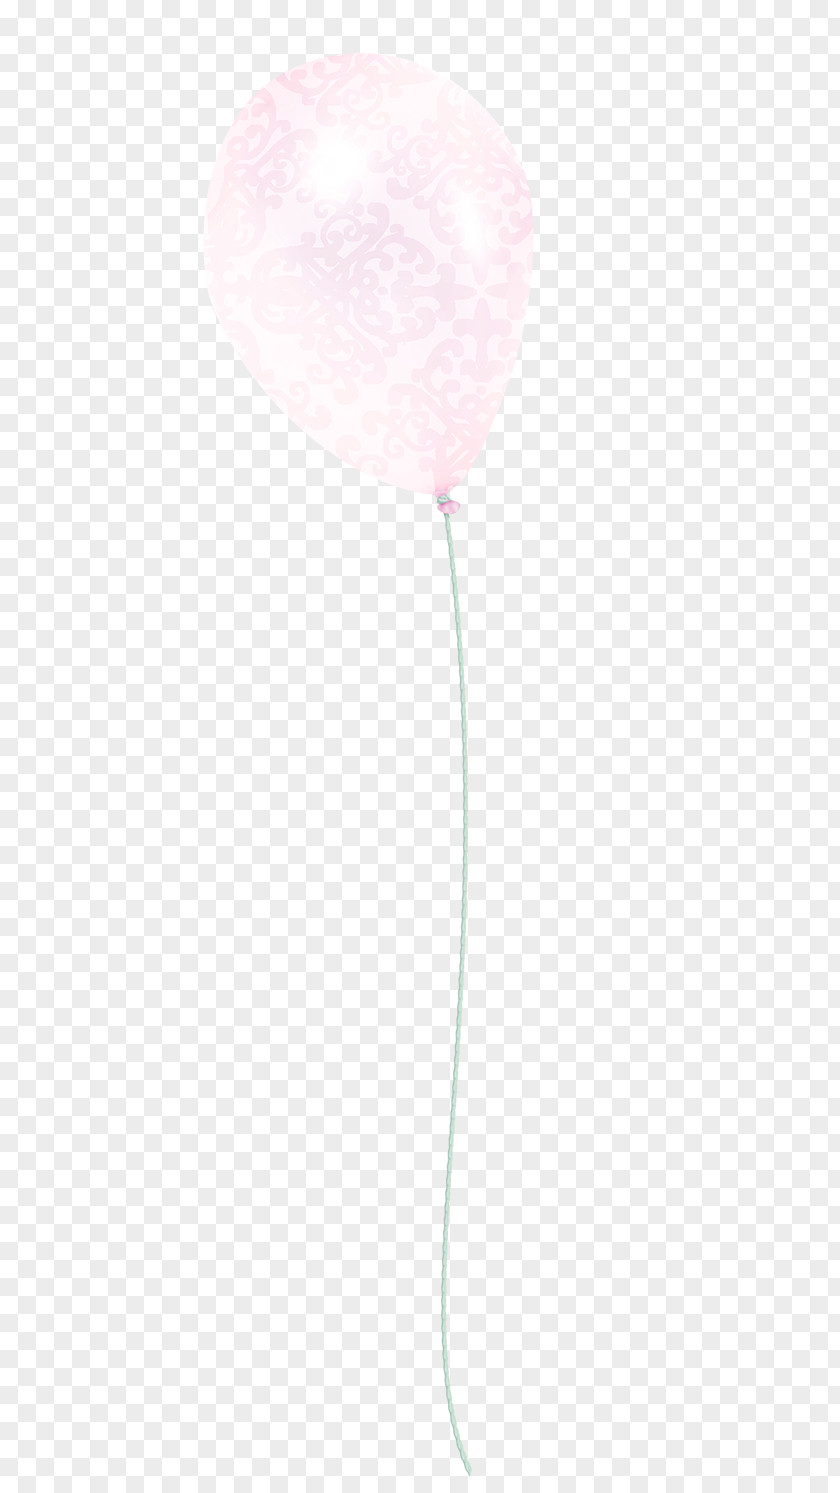 Colored Balloons Petal Pattern PNG